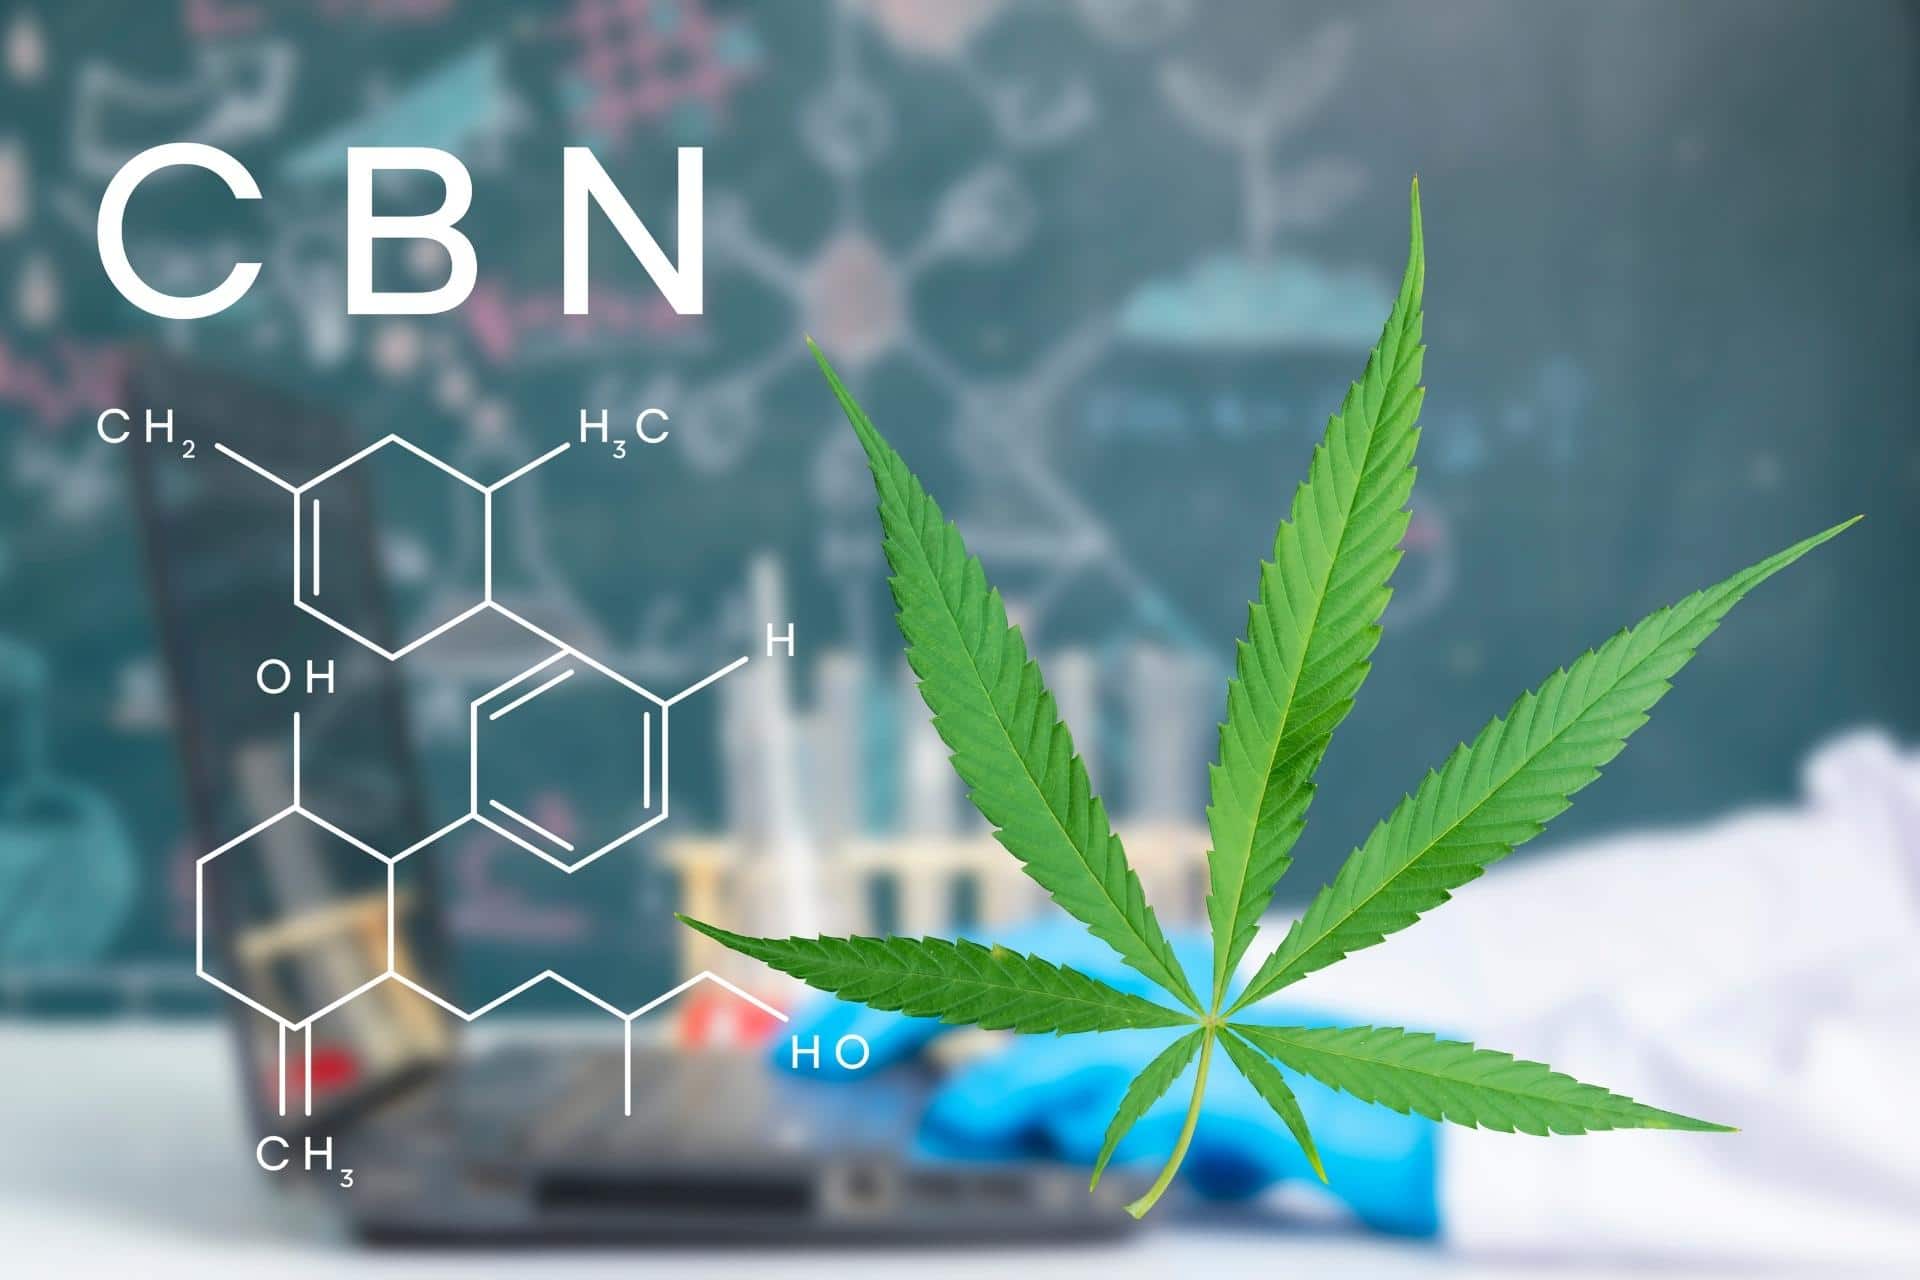 Cannabis leaf next to molecular structure of CBN molecule with chalkboard in background